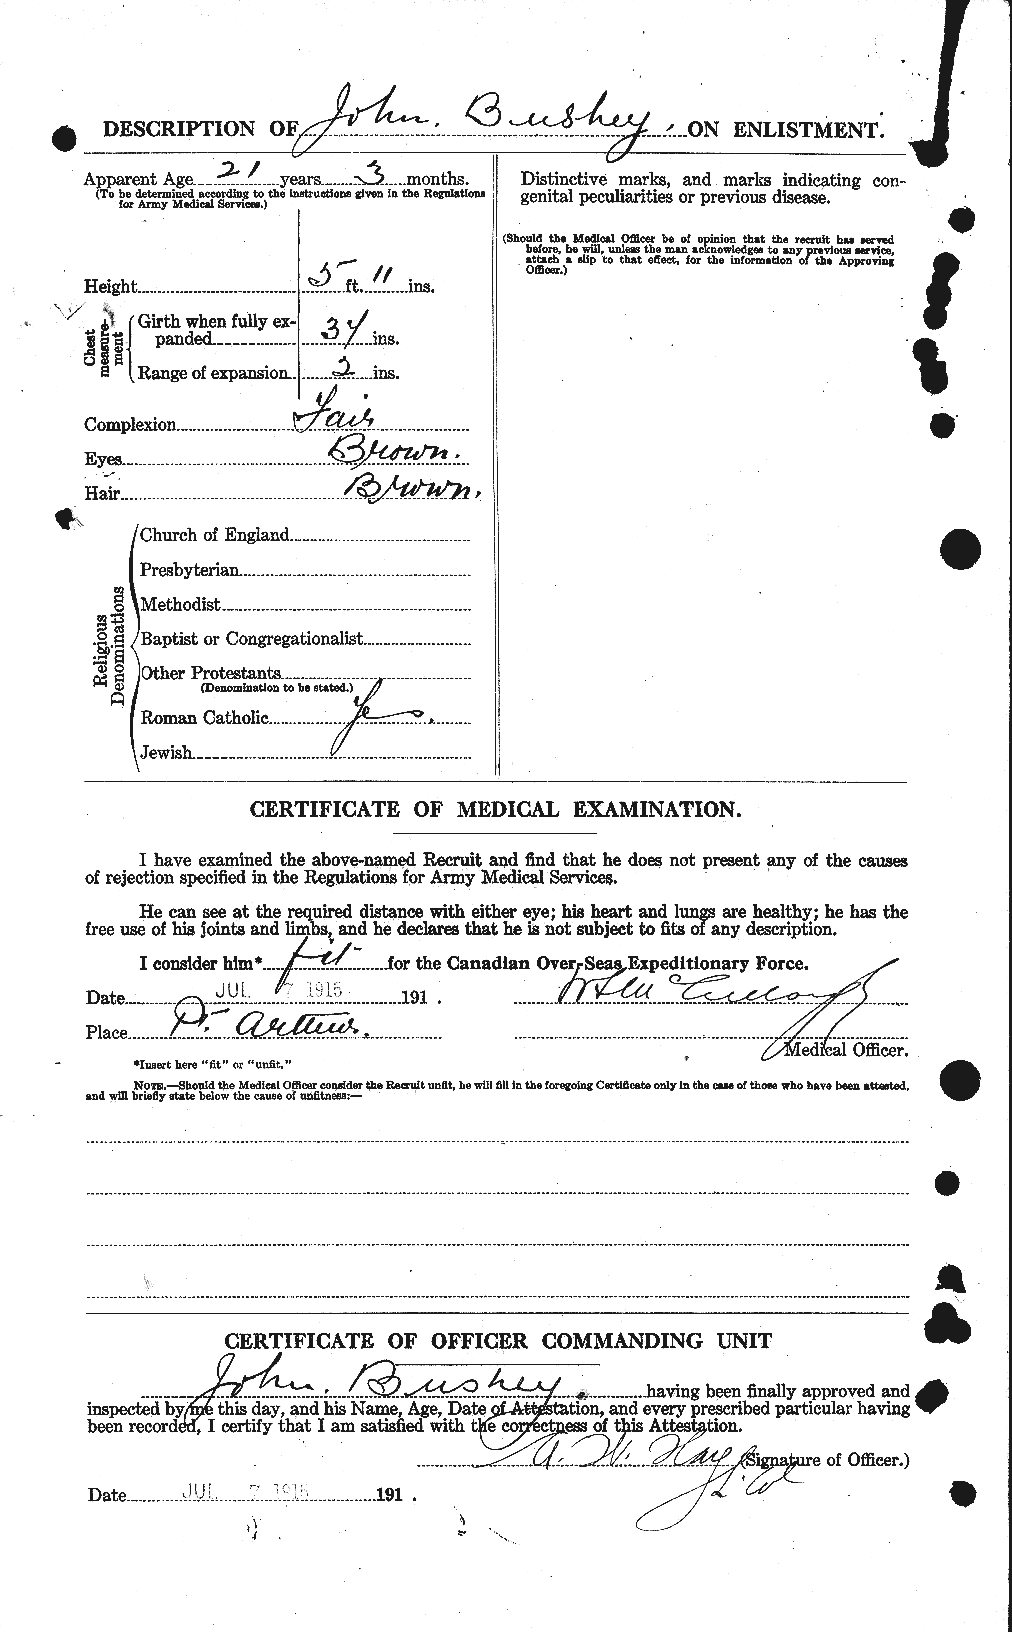 Personnel Records of the First World War - CEF 274498b